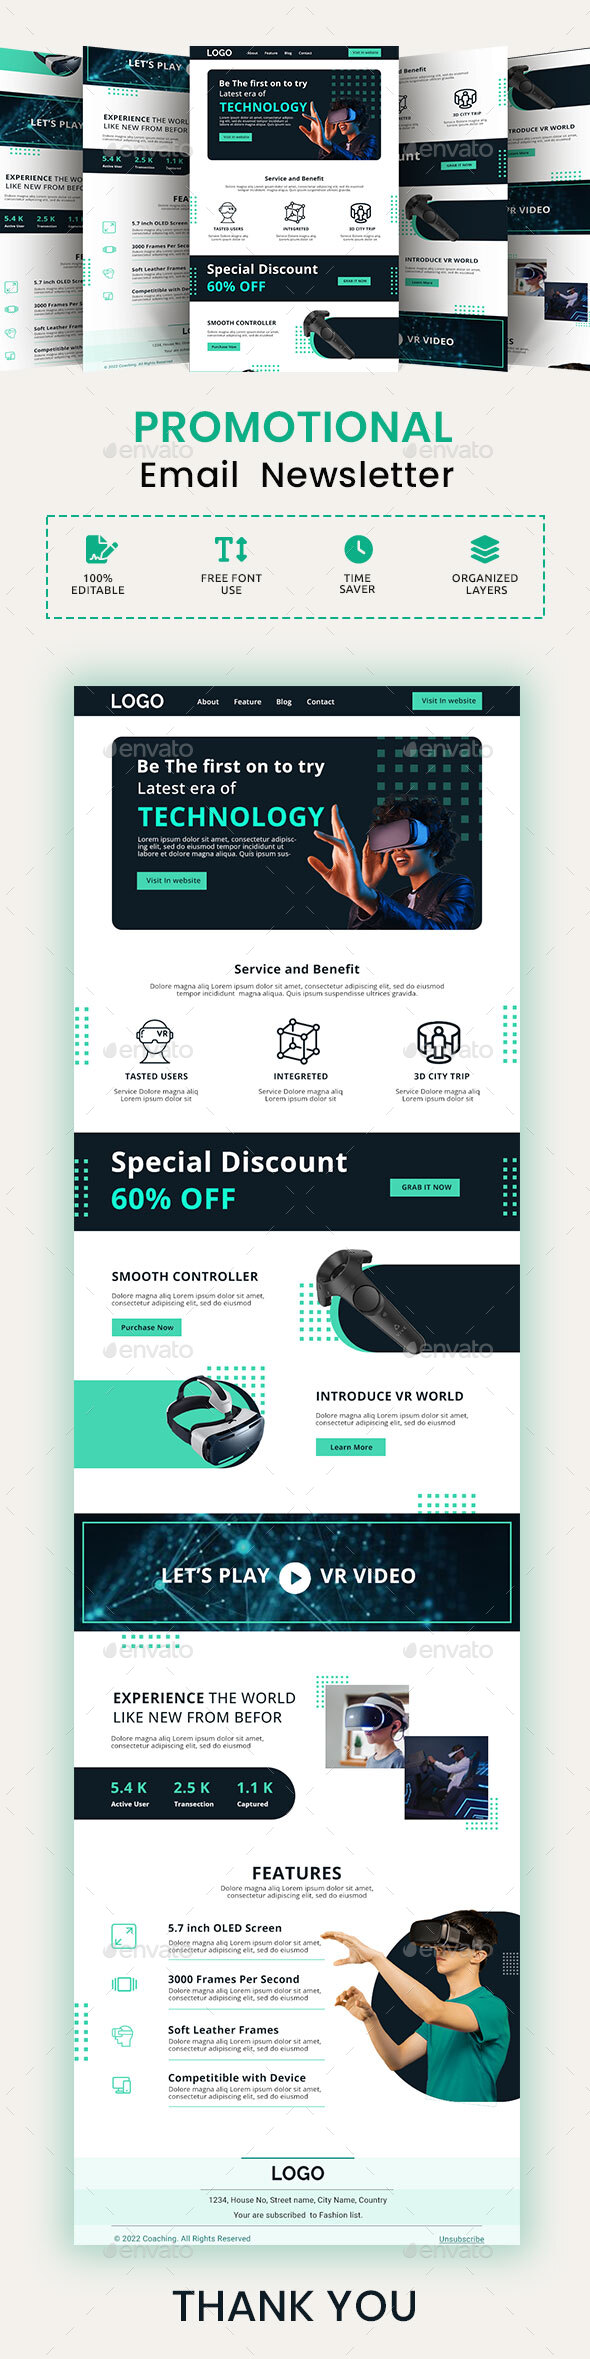 [DOWNLOAD]VR Email Newsletter PSD Template